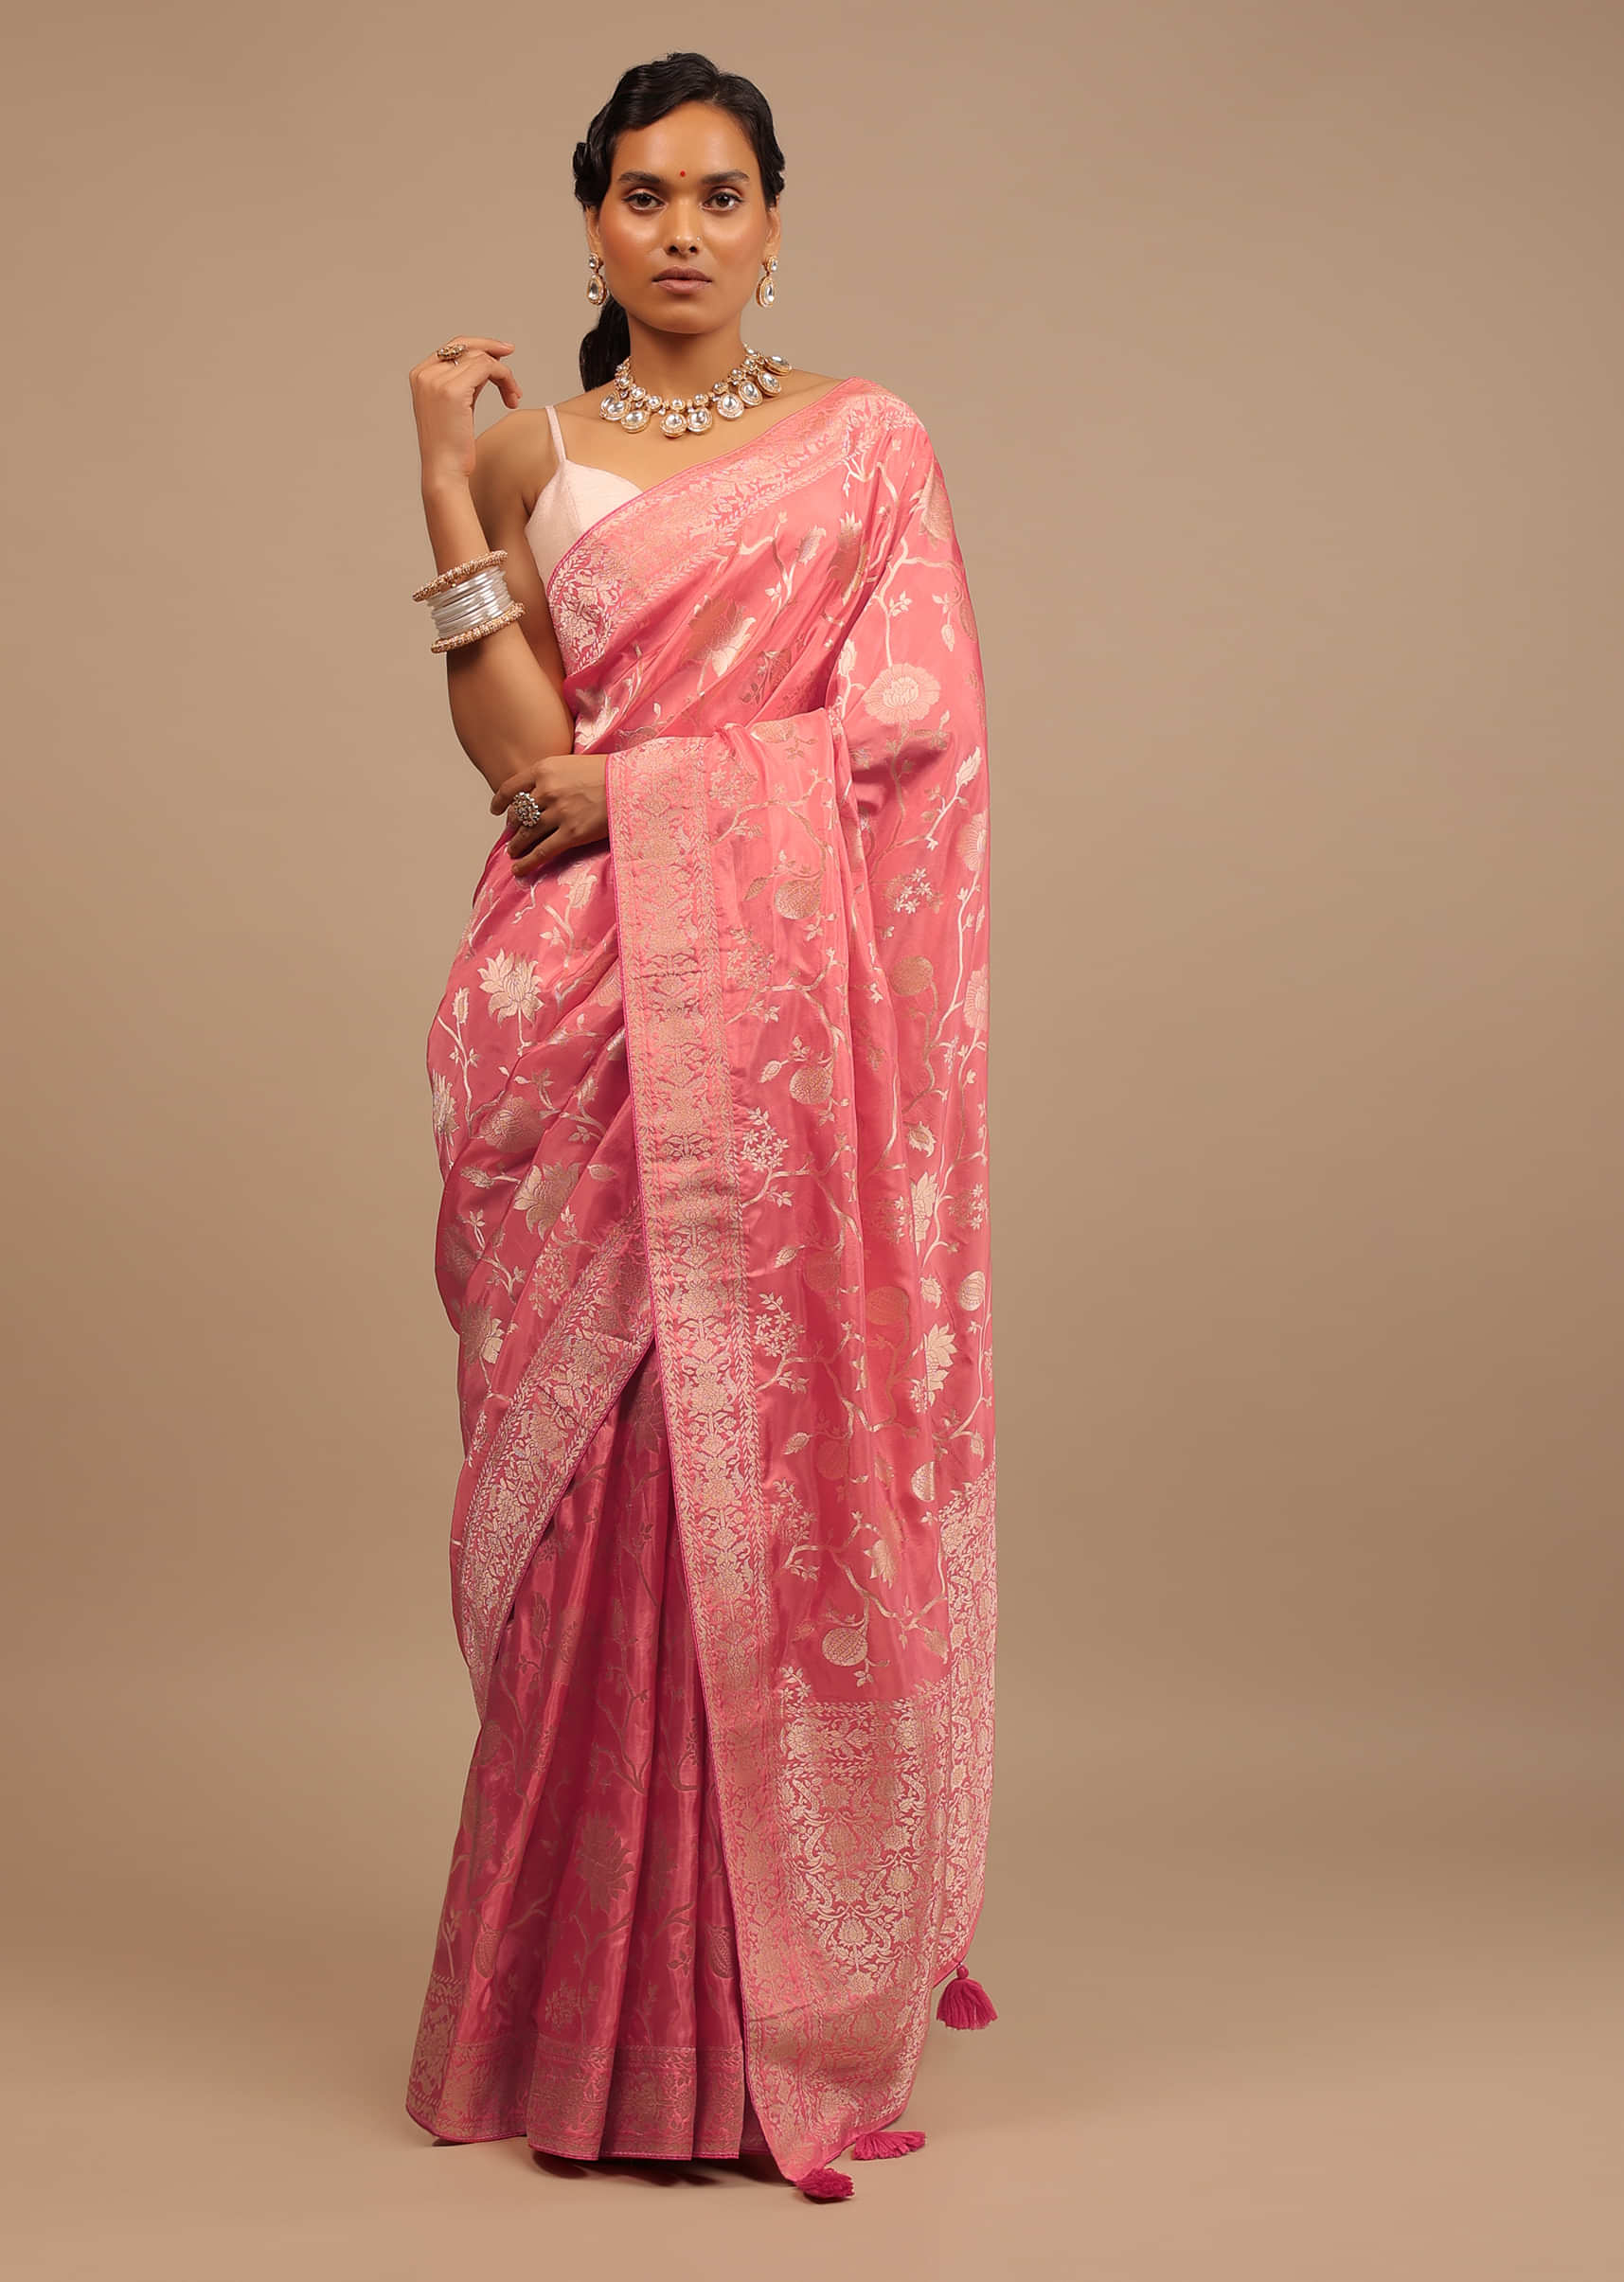 Salmon Pink Saree In Silk With Woven Floral Jaal And Intricate Floral Border